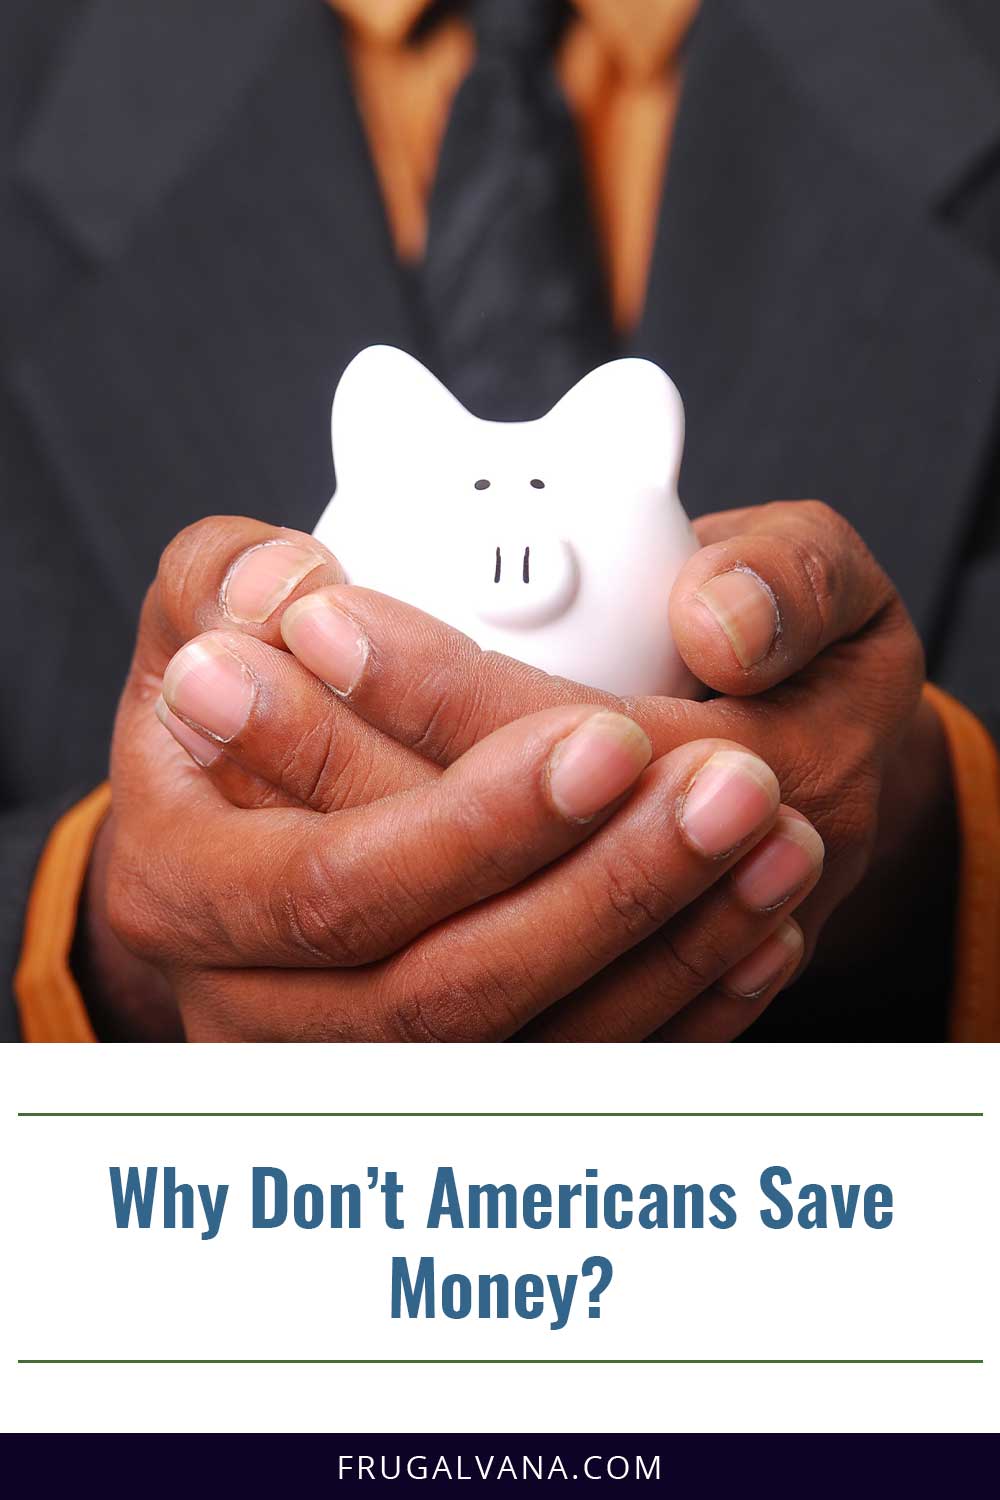 Why Don’t Americans Save Money?